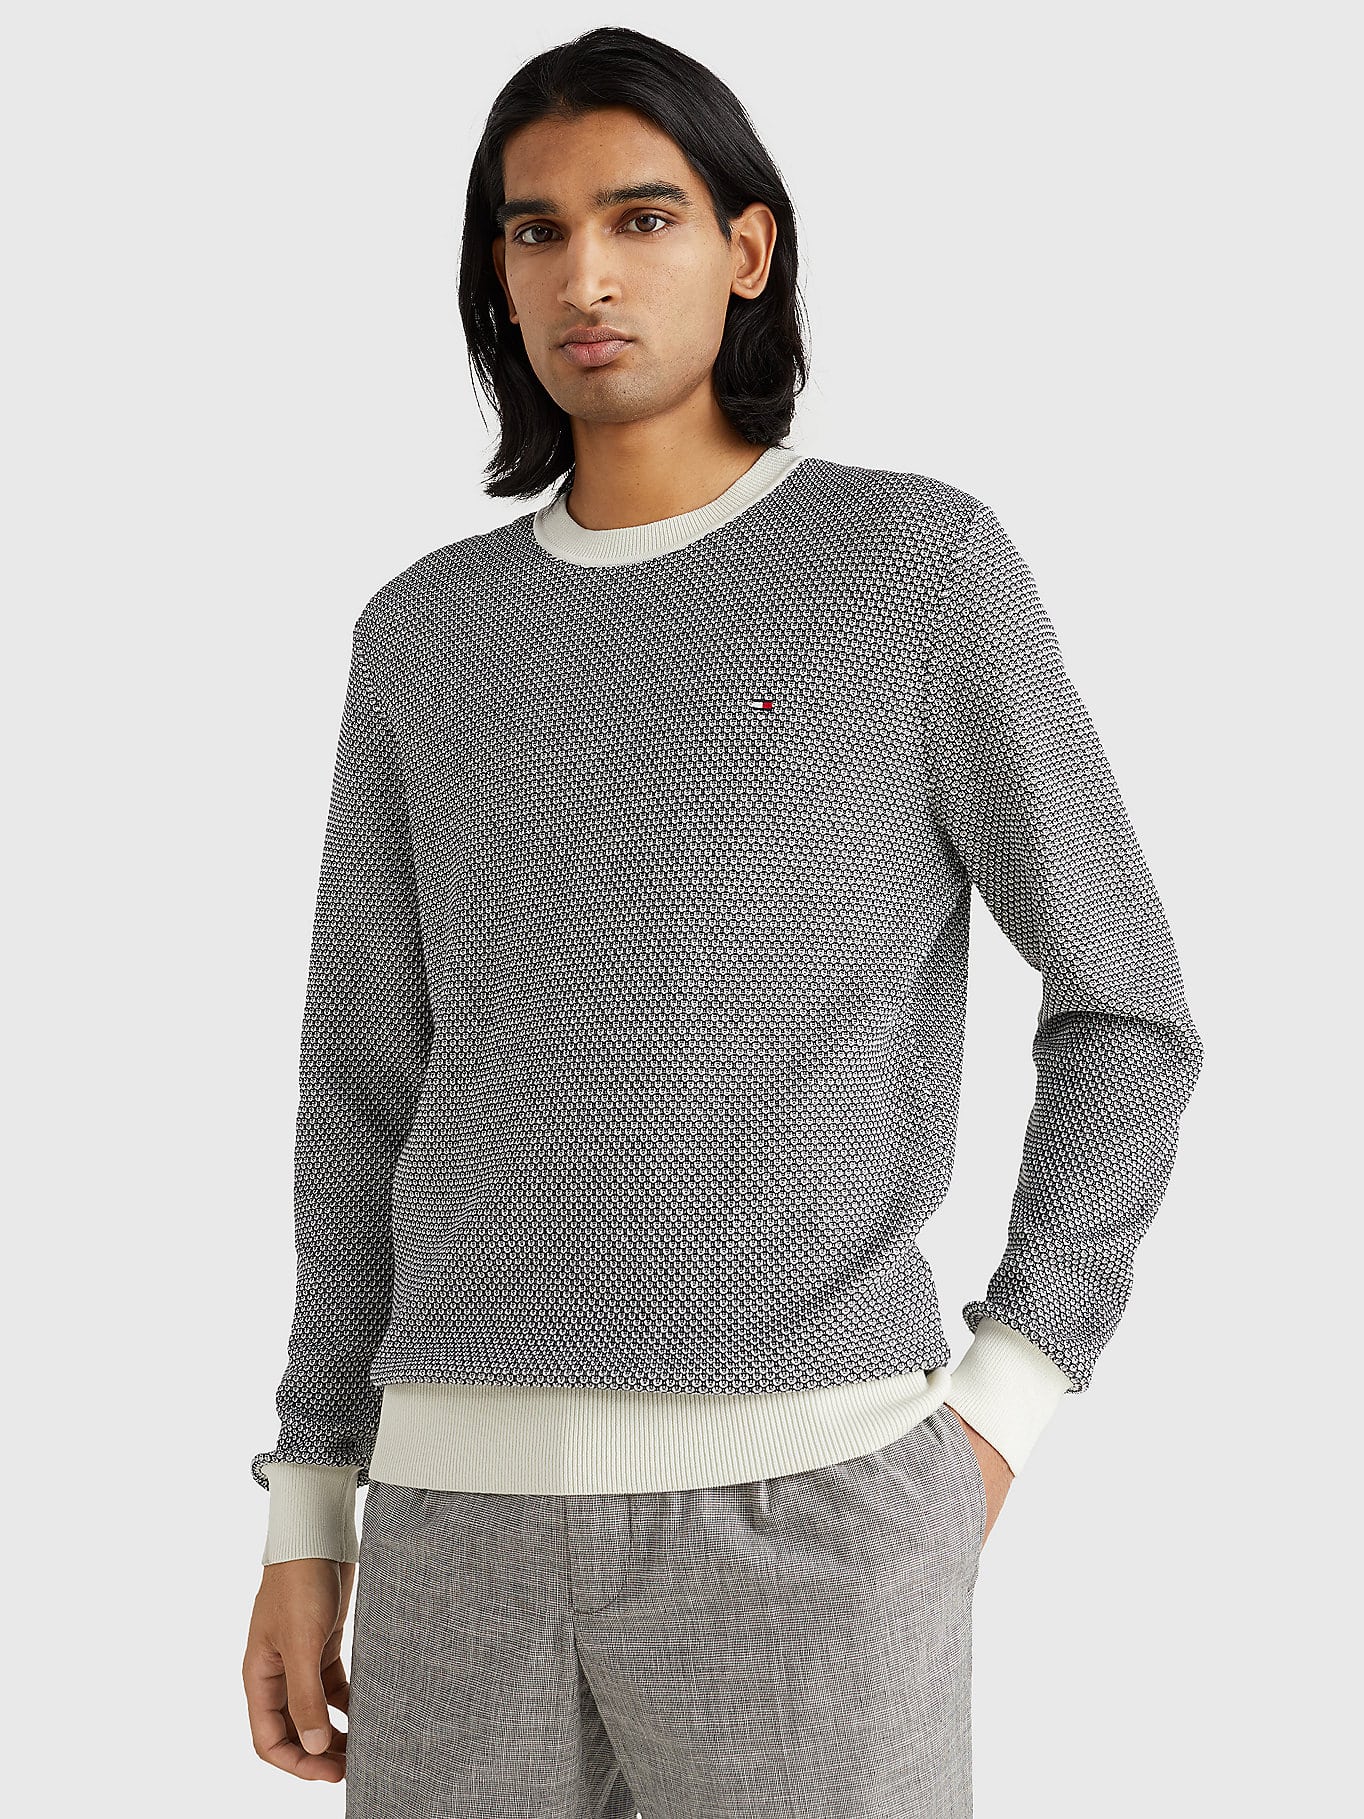 Buy Tommy Hilfiger Two Tone Textured Crew Neck - Scandinavian Fashion Store